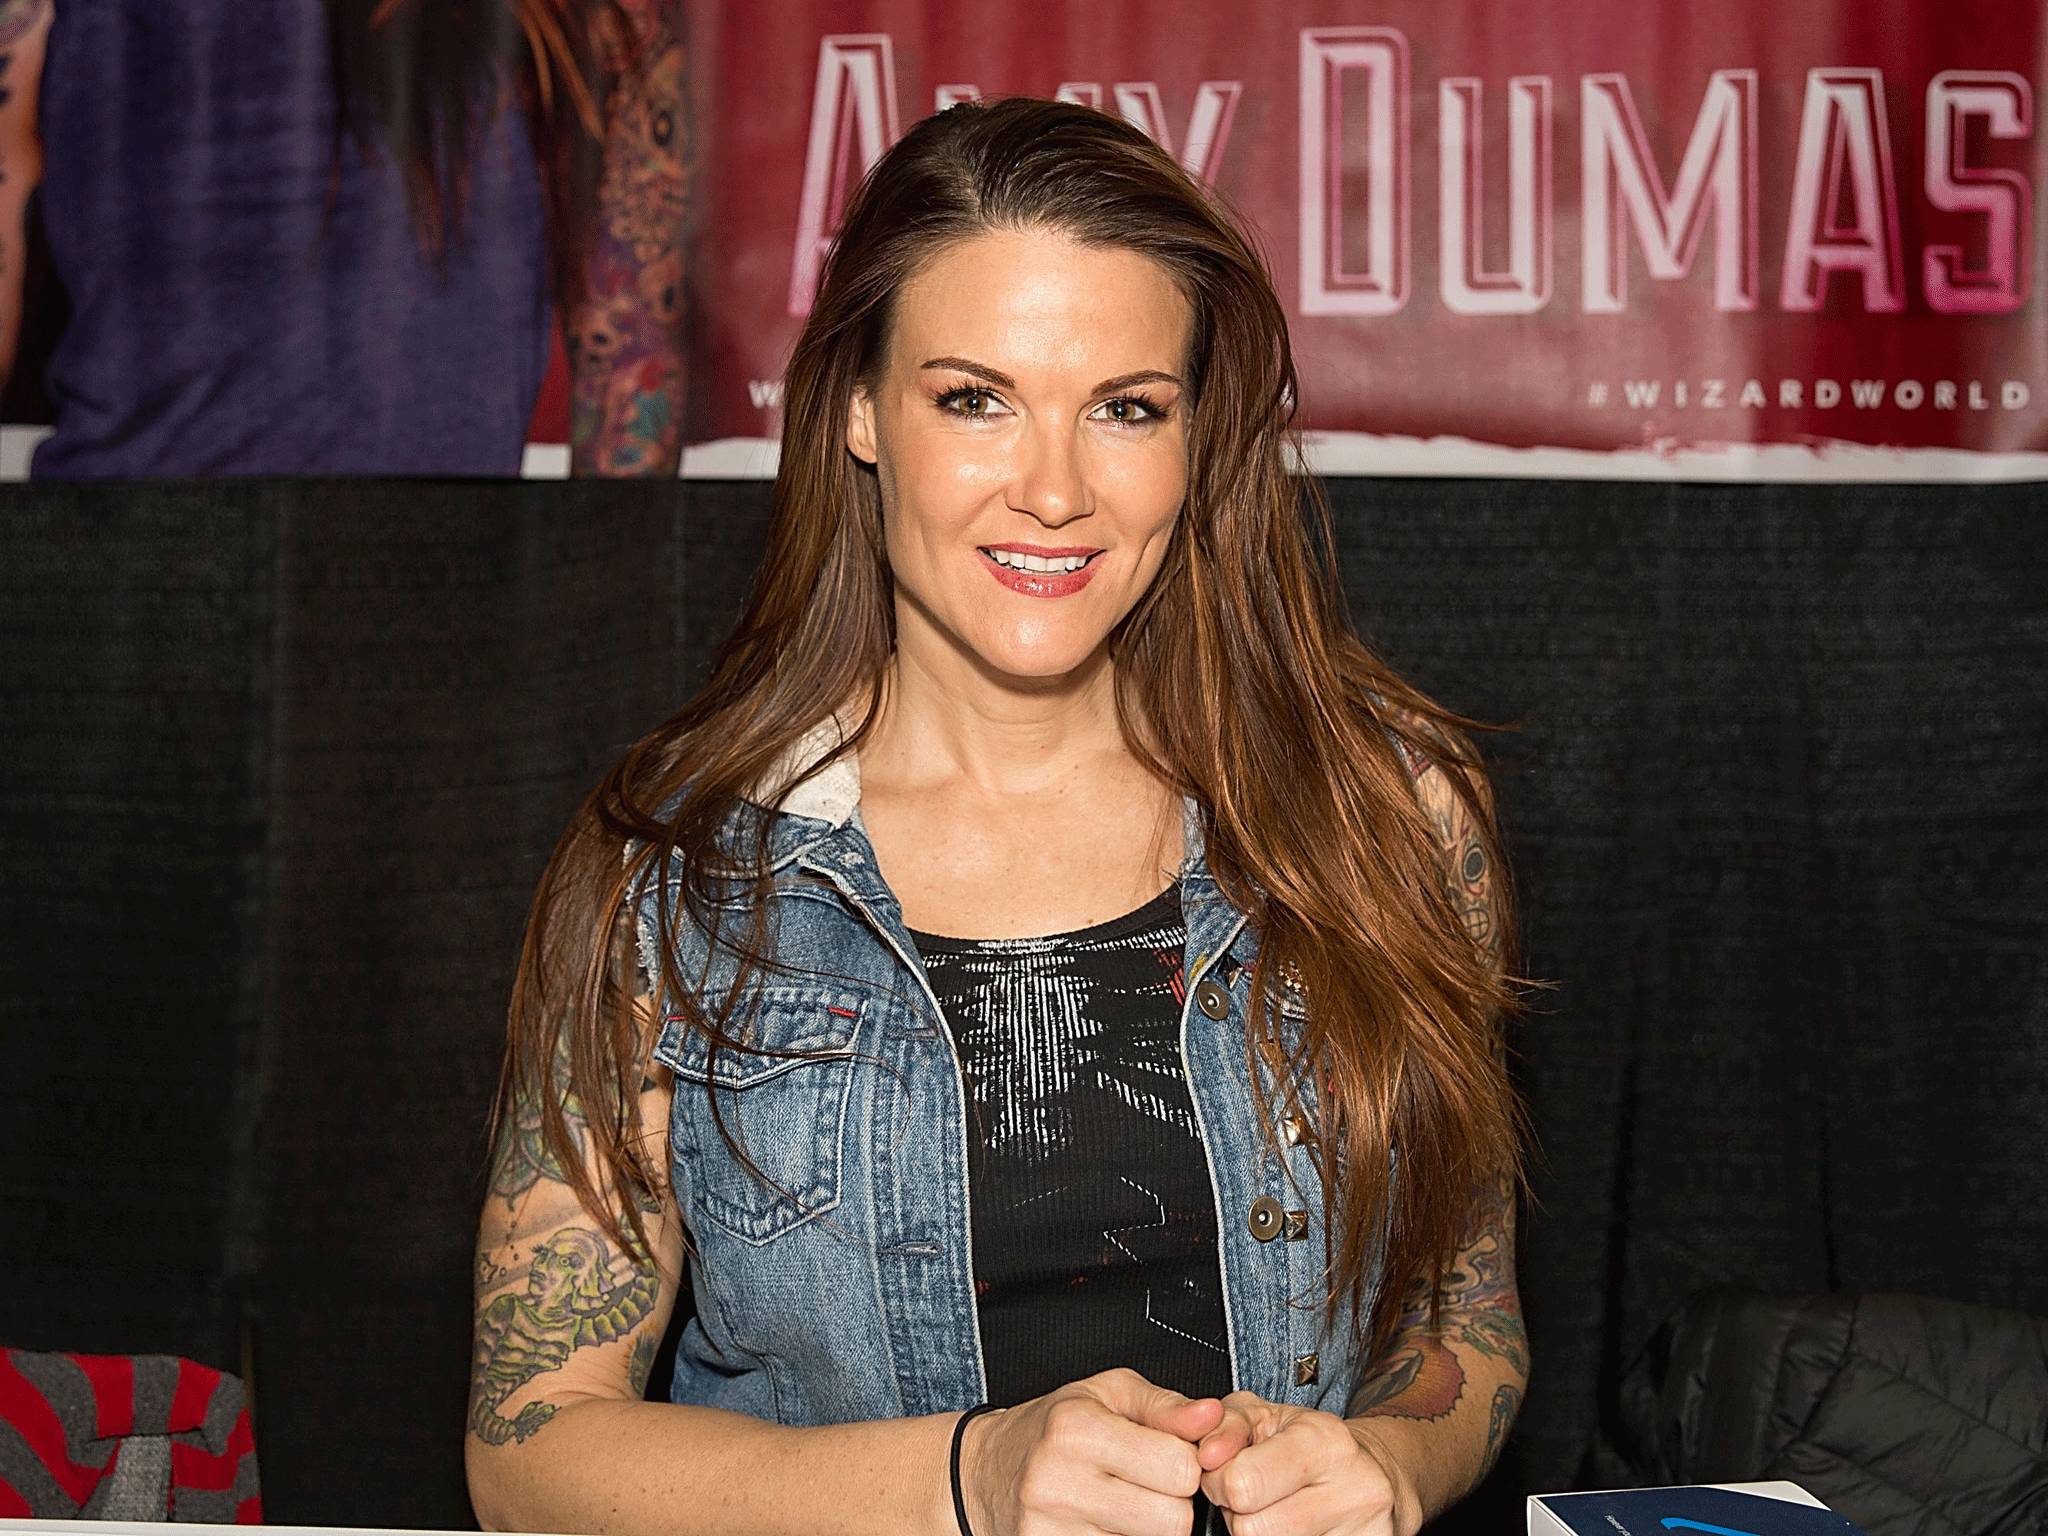 Lita To Be Inducted Into Wwe Hall Of Fame 2014 At Wrestlemania 30 The Independent